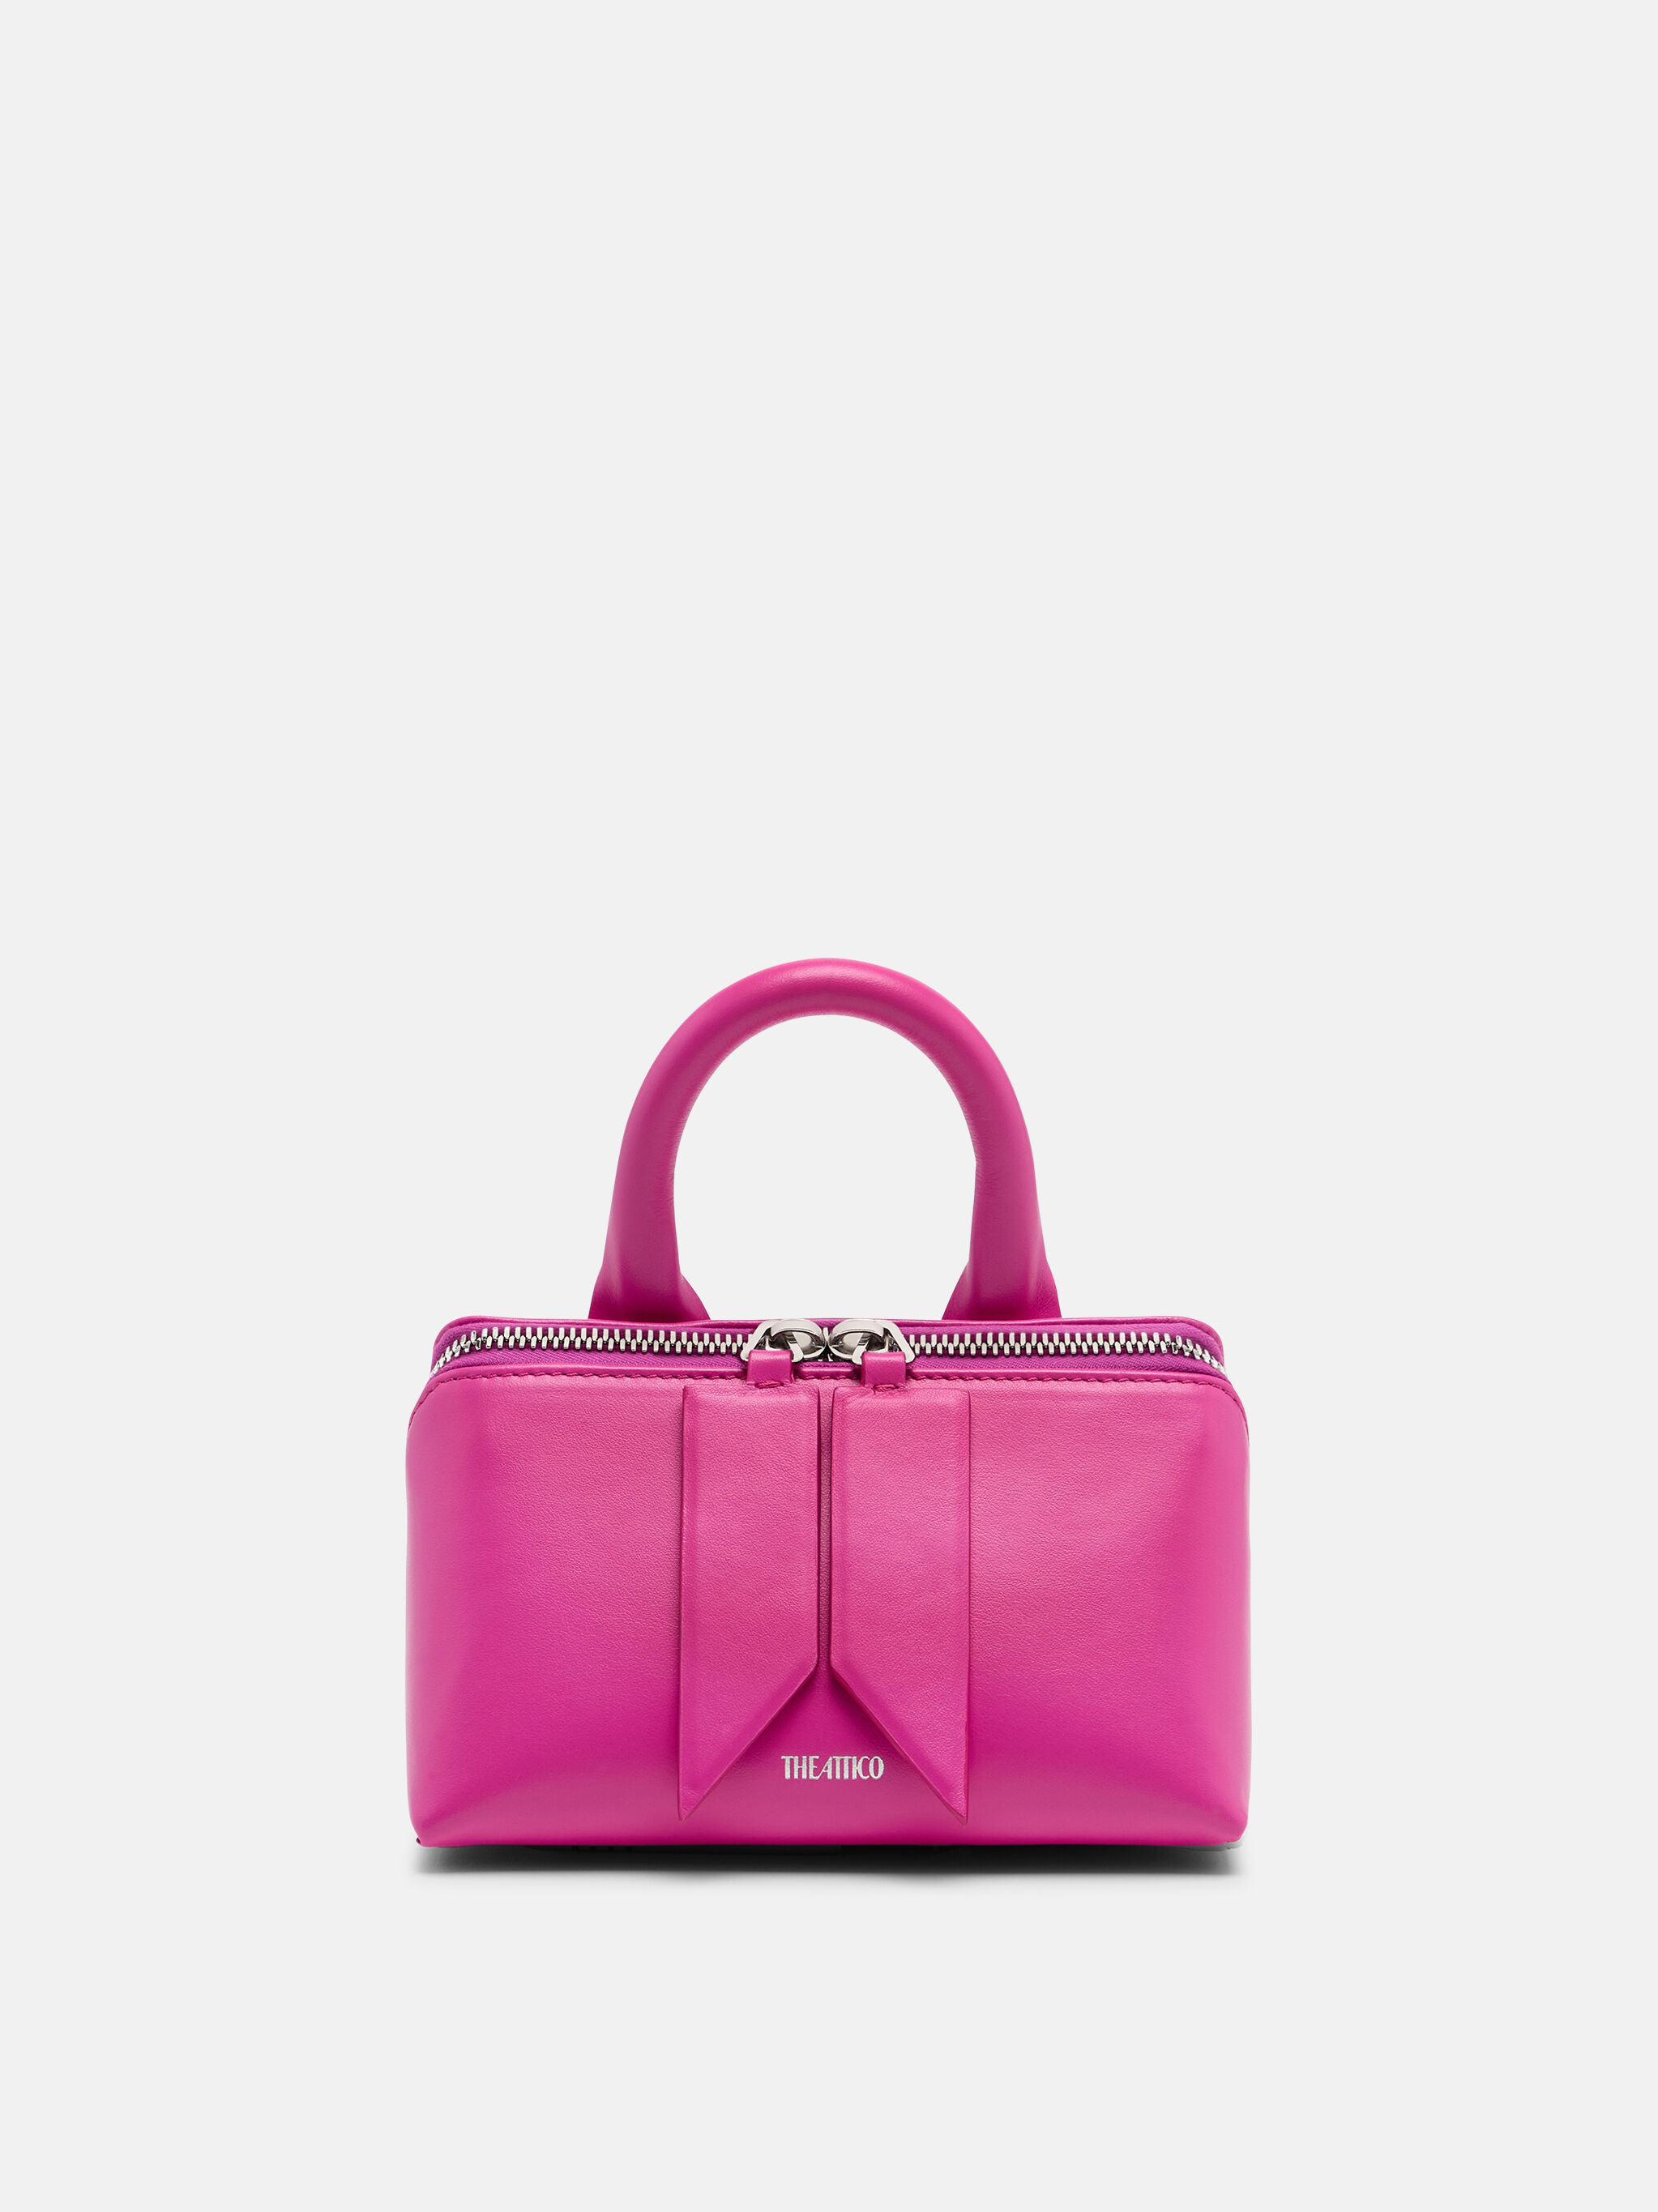 14,900+ Pink Purse Stock Photos, Pictures & Royalty-Free Images - iStock |  Pink shoes, Pink bag, Orange purse